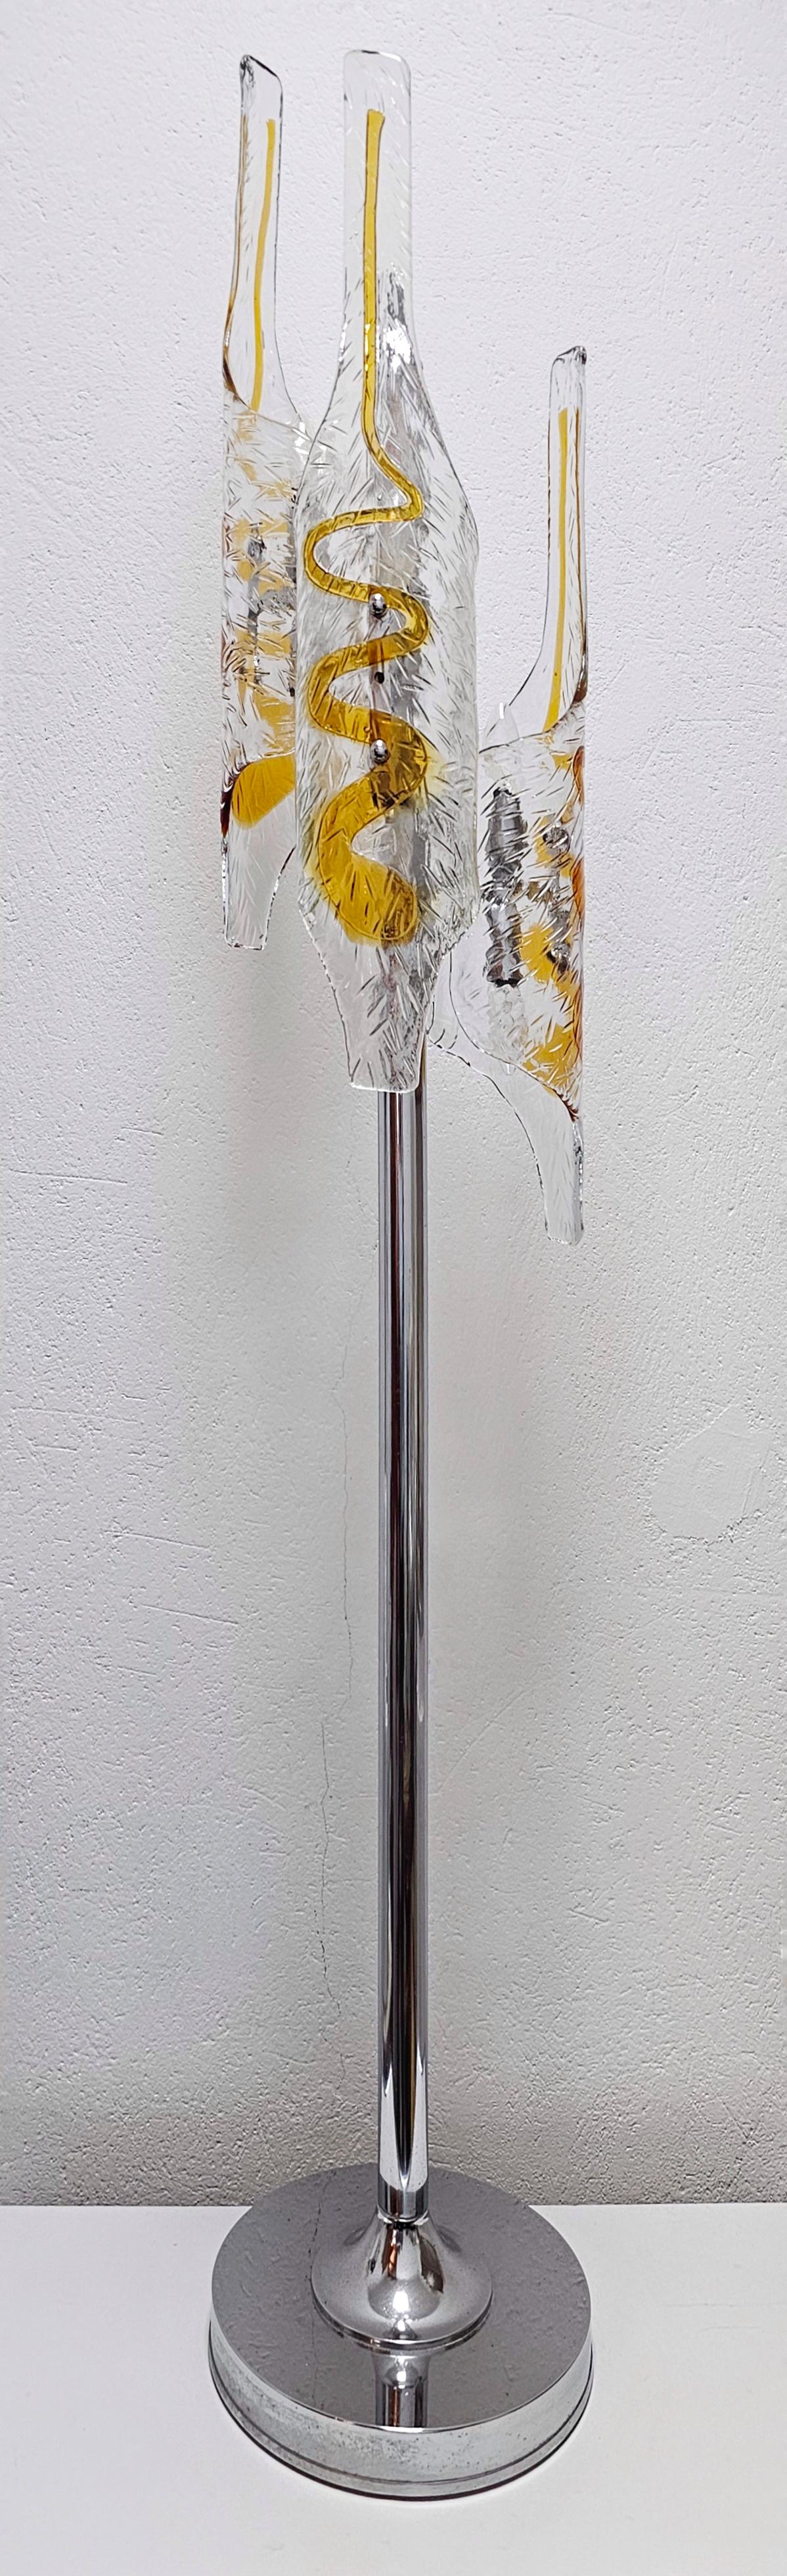 In this listing you will find a Mid Century Modern Murano textured glass floor lamp designed by Toni Zuccheri for Mazzega. It featured gorgeous organic shaped glass shades in clear and amber glass. Made in Italy in 1970s.

The lamp has 6 lights, 2